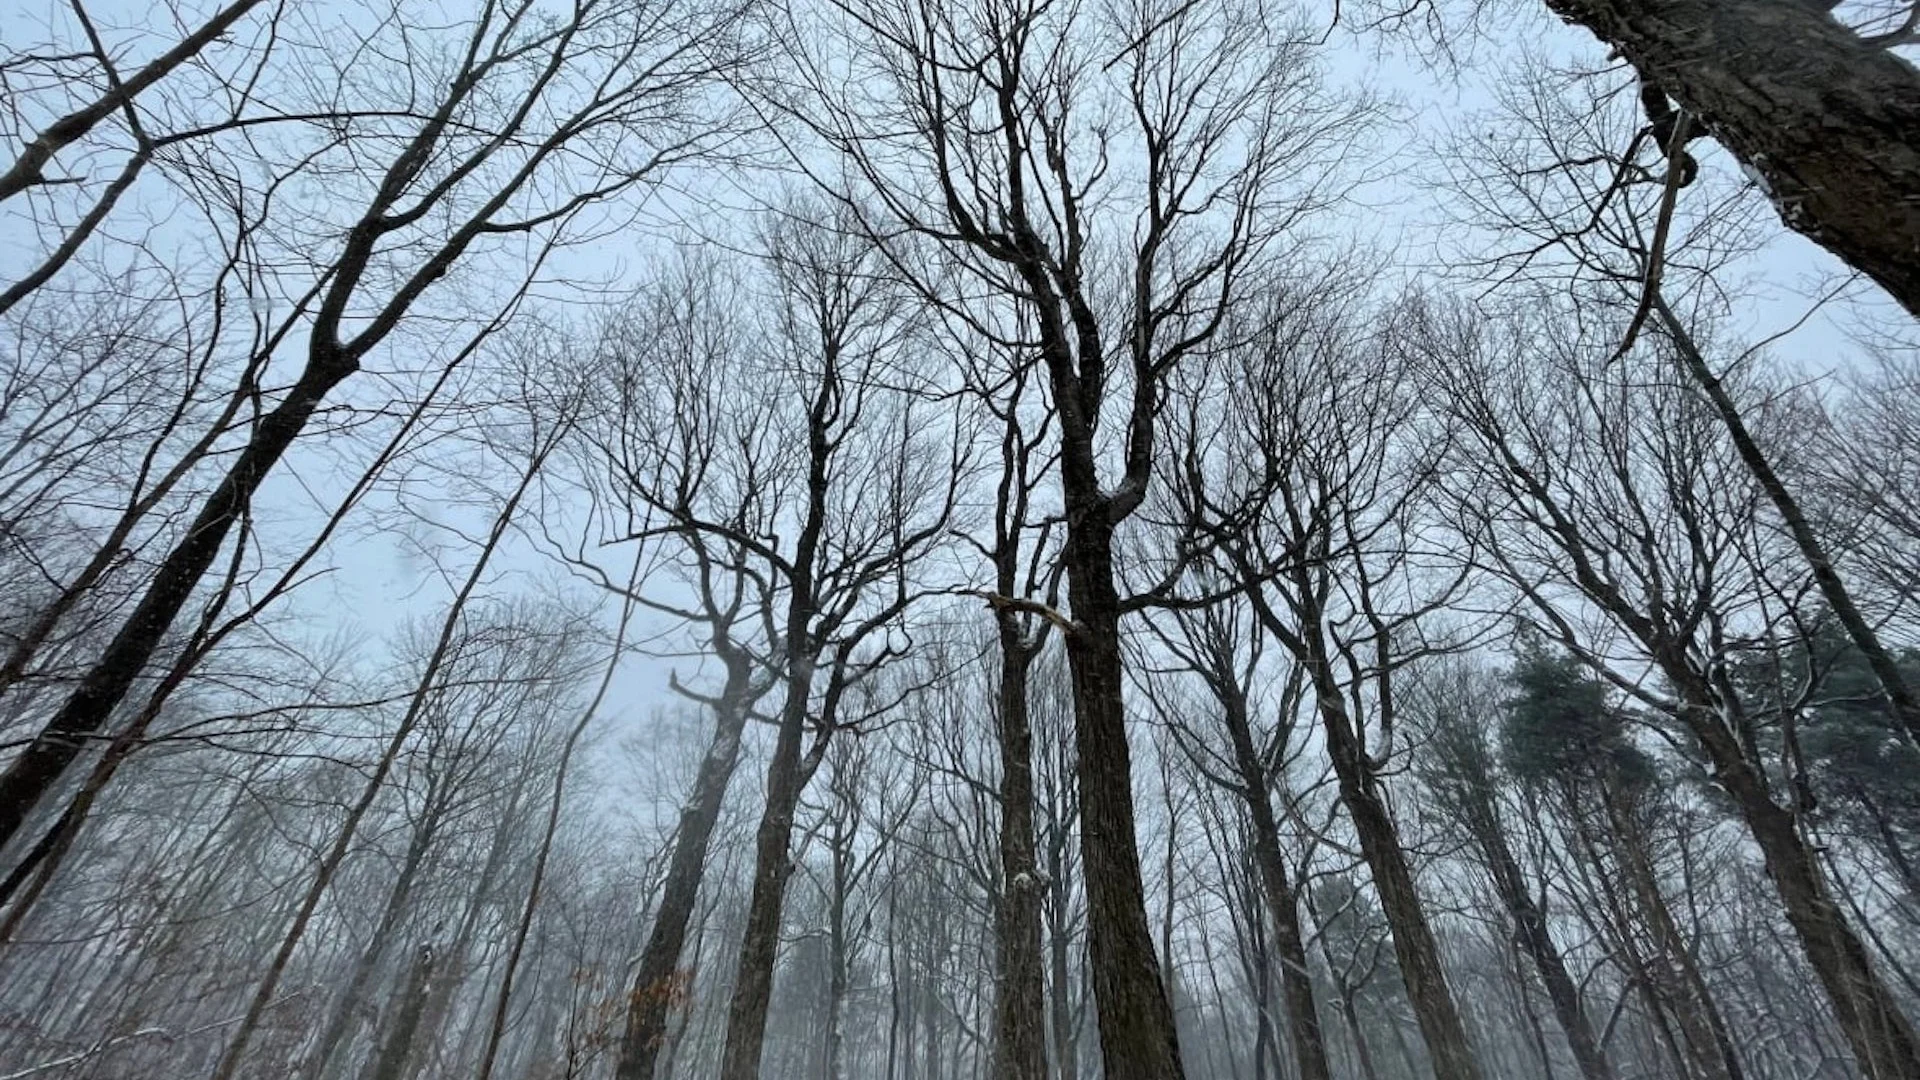 How Montreal's forests are faring 25 years after the destructive ice storm